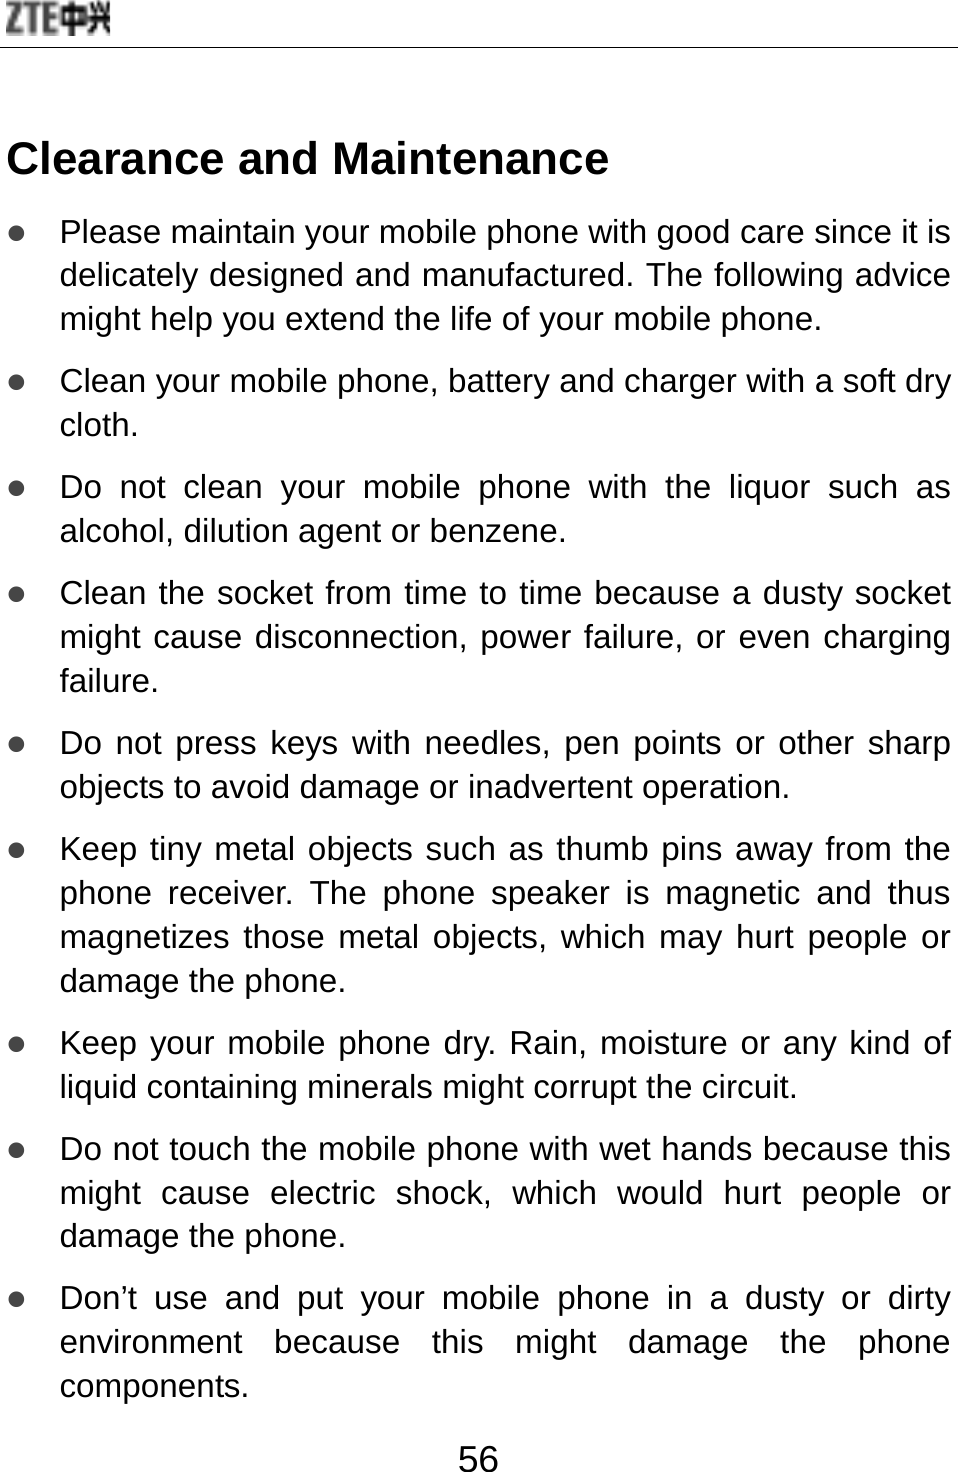  56 Clearance and Maintenance z Please maintain your mobile phone with good care since it is delicately designed and manufactured. The following advice might help you extend the life of your mobile phone.   z Clean your mobile phone, battery and charger with a soft dry cloth. z Do not clean your mobile phone with the liquor such as alcohol, dilution agent or benzene. z Clean the socket from time to time because a dusty socket might cause disconnection, power failure, or even charging failure. z Do not press keys with needles, pen points or other sharp objects to avoid damage or inadvertent operation. z Keep tiny metal objects such as thumb pins away from the phone receiver. The phone speaker is magnetic and thus magnetizes those metal objects, which may hurt people or damage the phone. z Keep your mobile phone dry. Rain, moisture or any kind of liquid containing minerals might corrupt the circuit. z Do not touch the mobile phone with wet hands because this might cause electric shock, which would hurt people or damage the phone.   z Don’t use and put your mobile phone in a dusty or dirty environment because this might damage the phone components. 